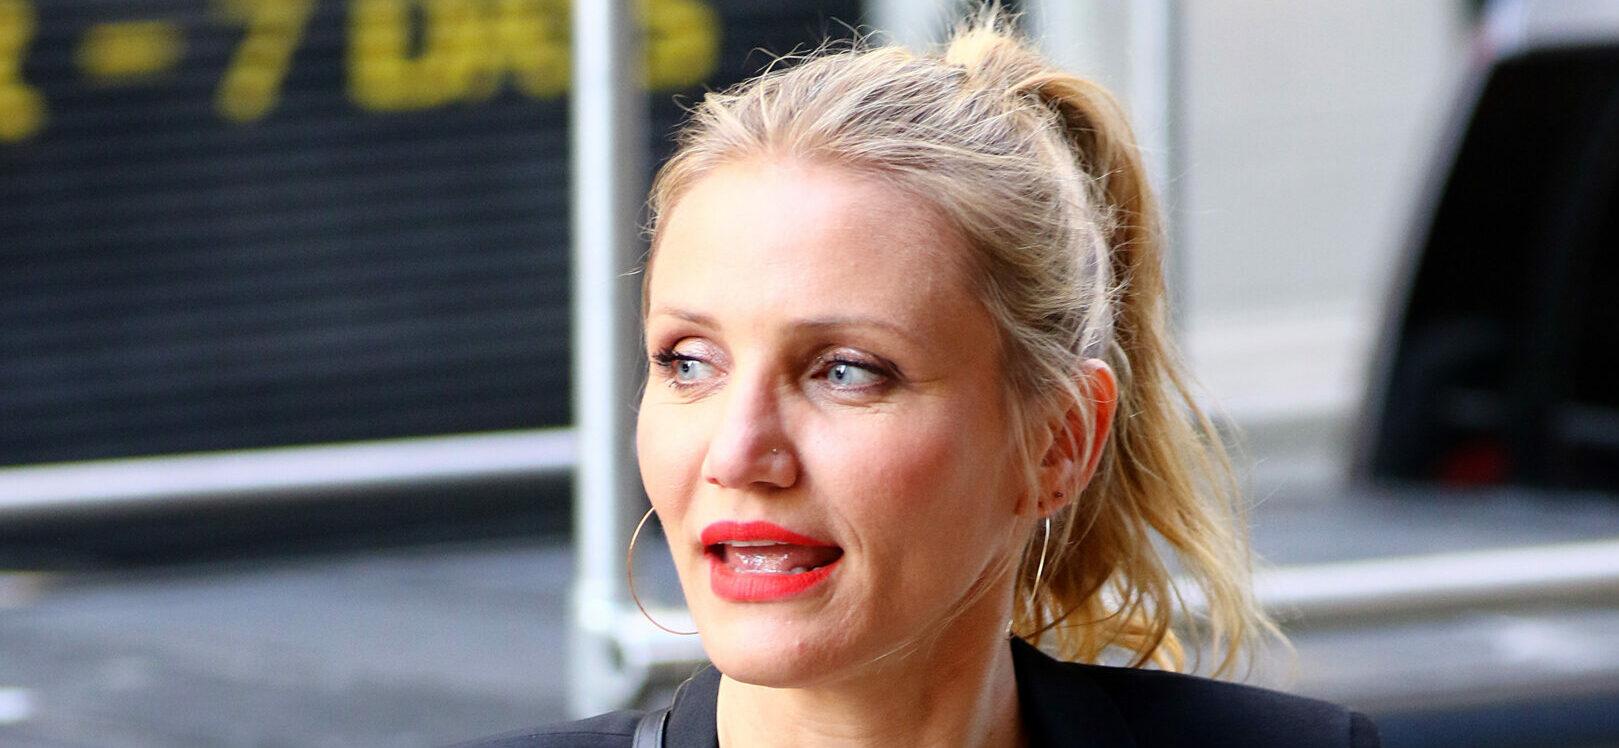 Cameron Diaz Bags Praise From Director Cameron Crowe For Her ‘Kinetic Energy’ In ‘Vanilla Sky’